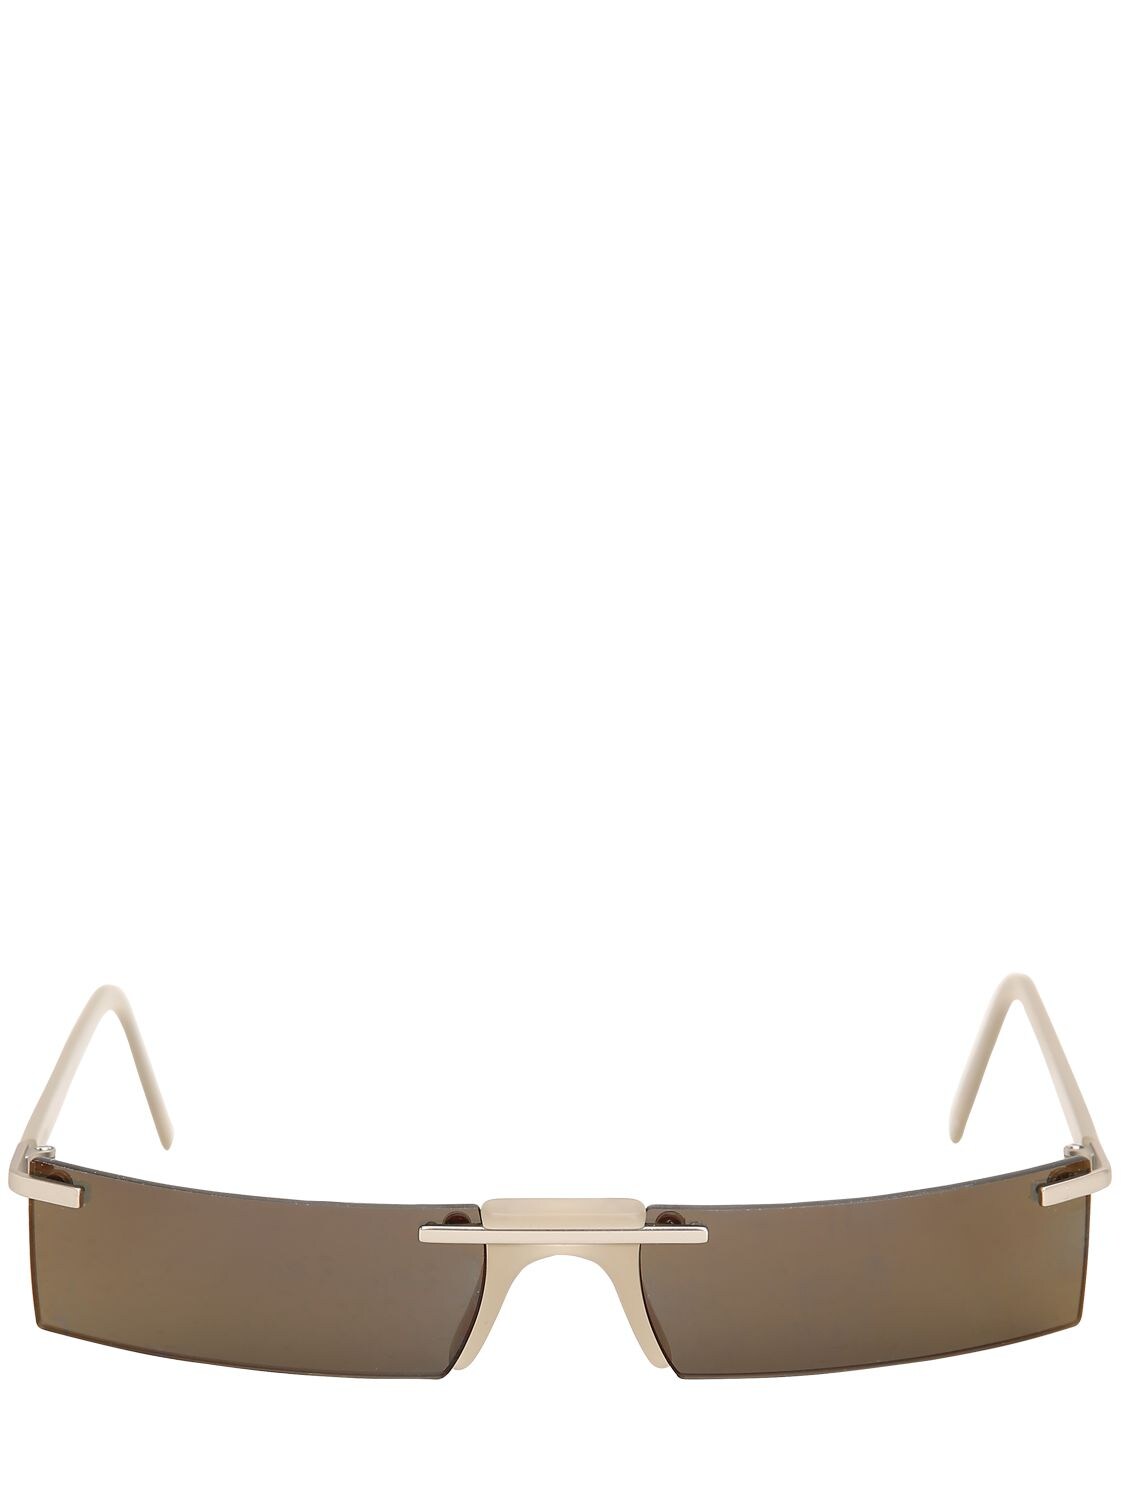 Andy Wolf Wentworth Rectangular Sunglasses In Silver